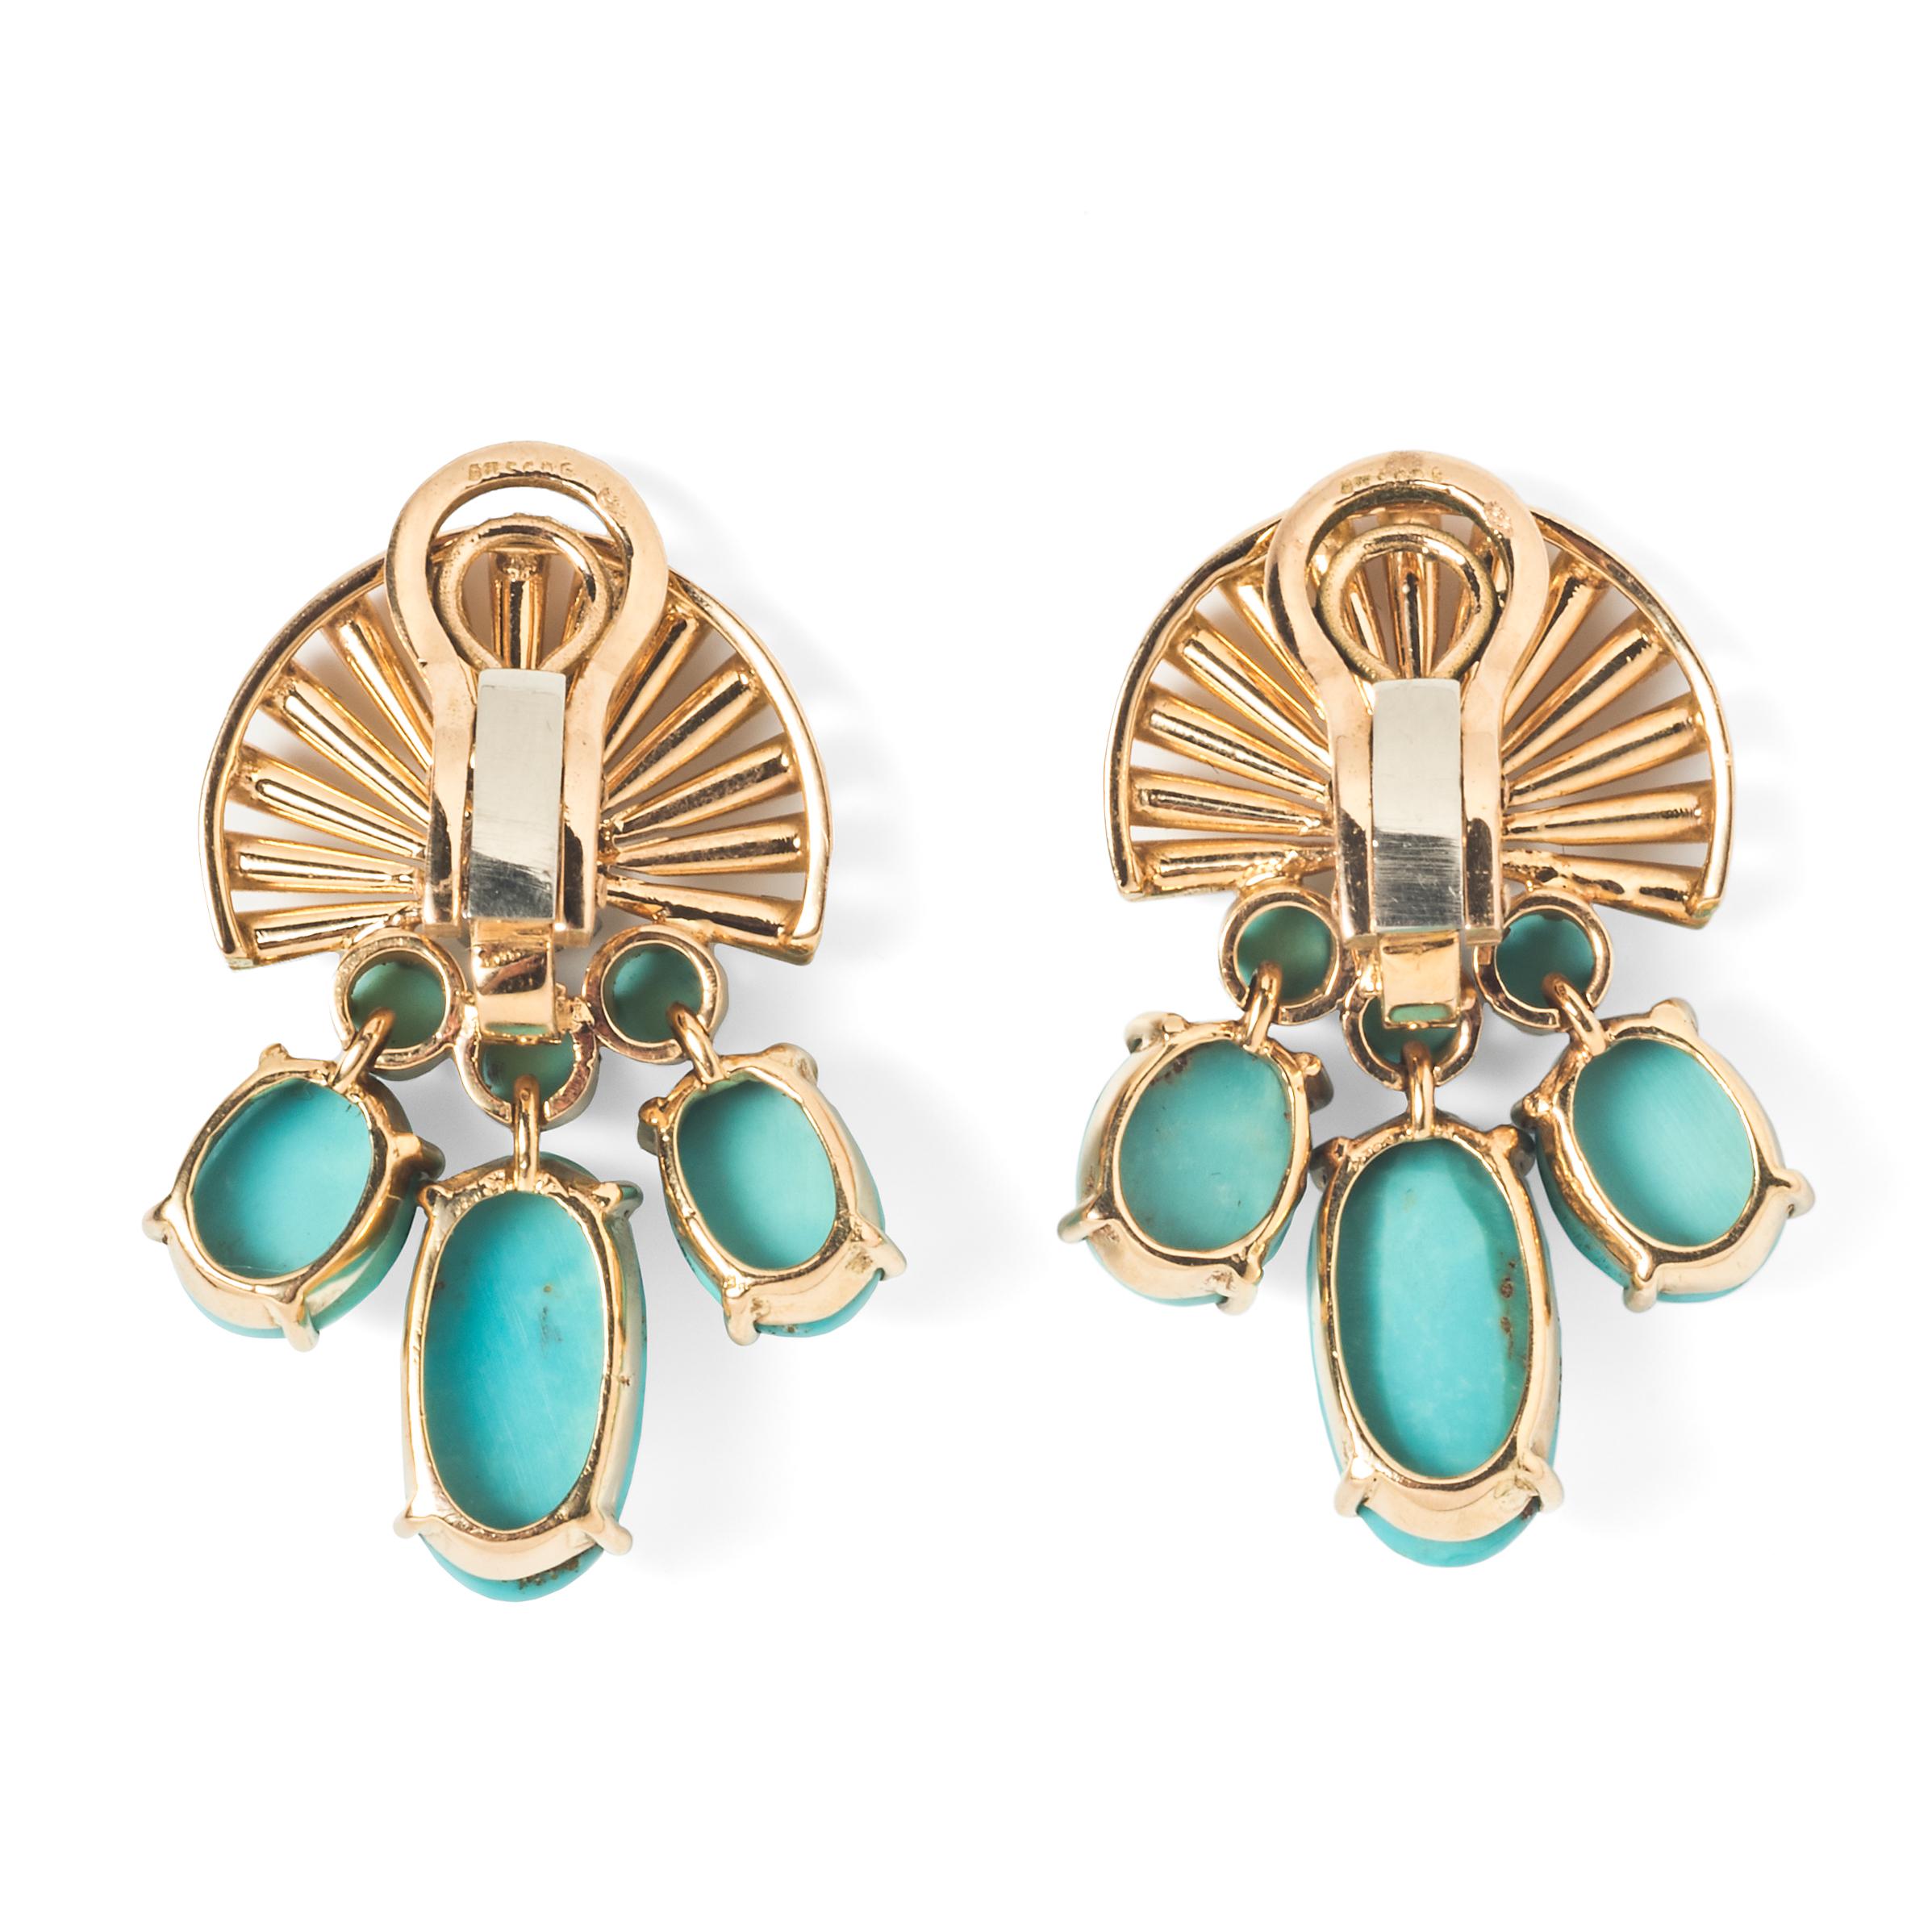 These charming vintage ear clips feature an 18k yellow gold fan shape suspending a graduated fringe of turquoise cabochons. The perfect color and composition for everyday wear.

- 1.20” x .80”
- 18k yellow gold
- 10 cabochon turquoise beads
- 1.0